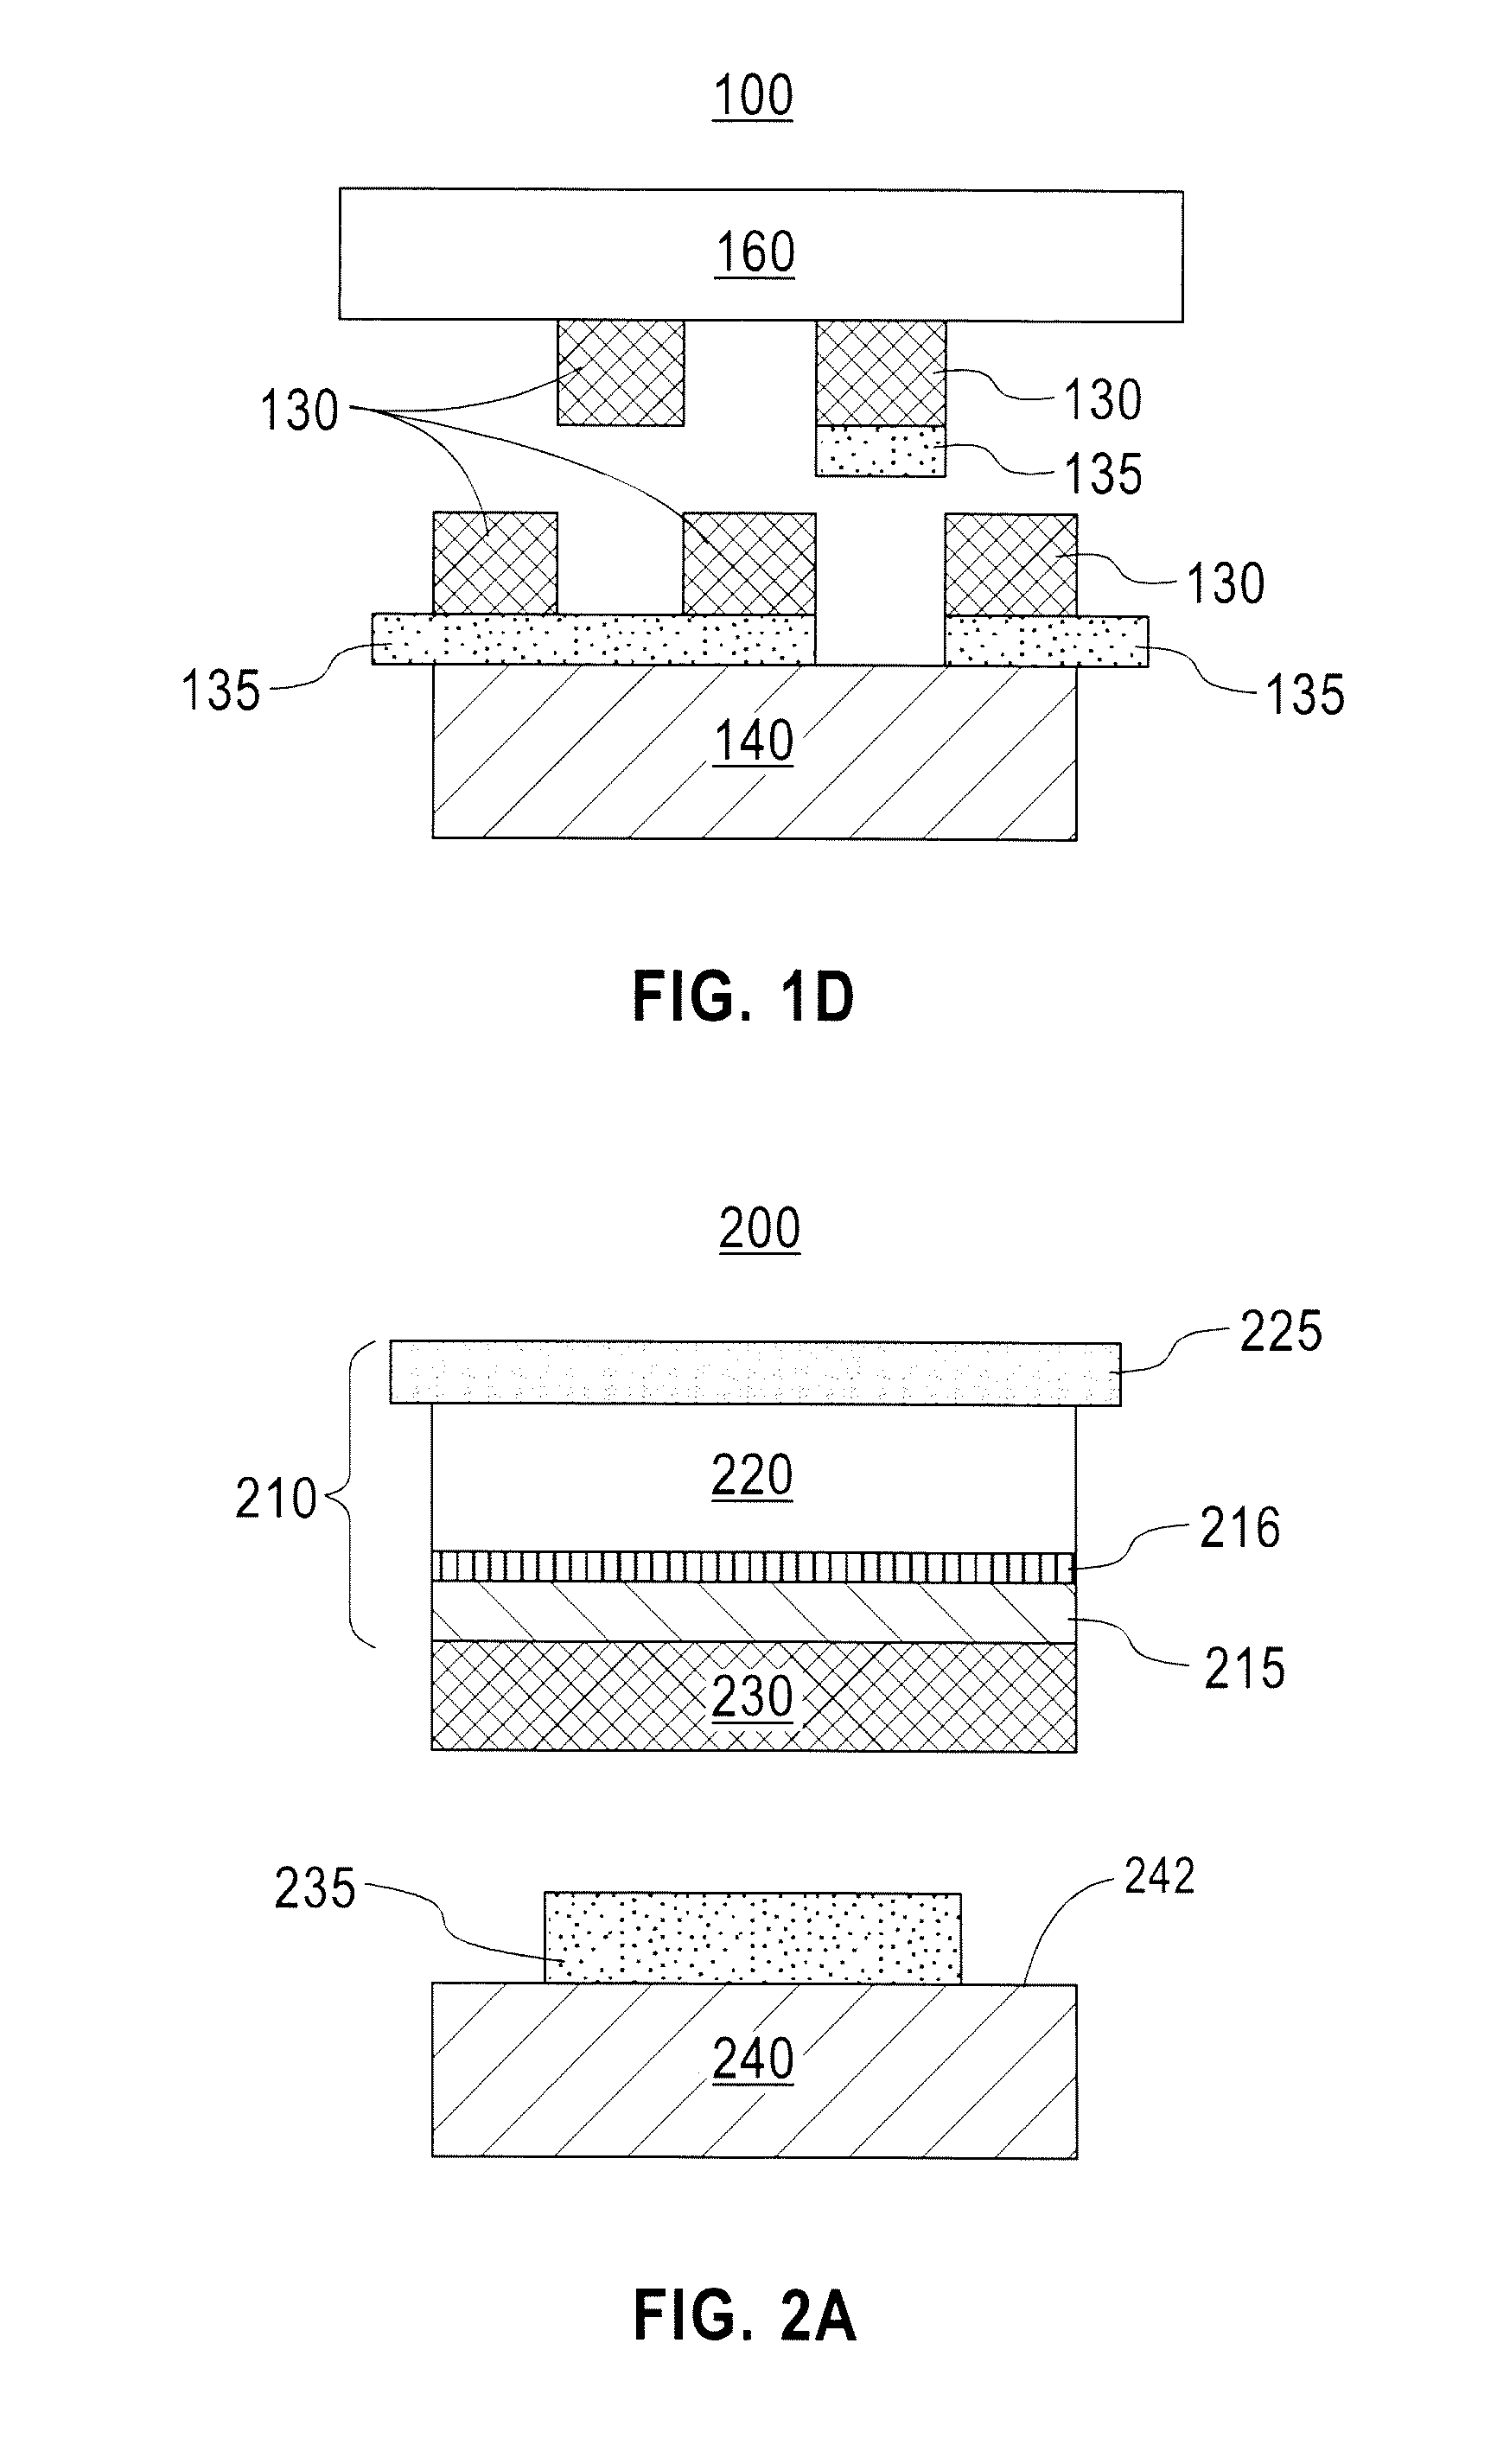 Method of forming a flexible semiconductor layer and devices on a flexible carrier